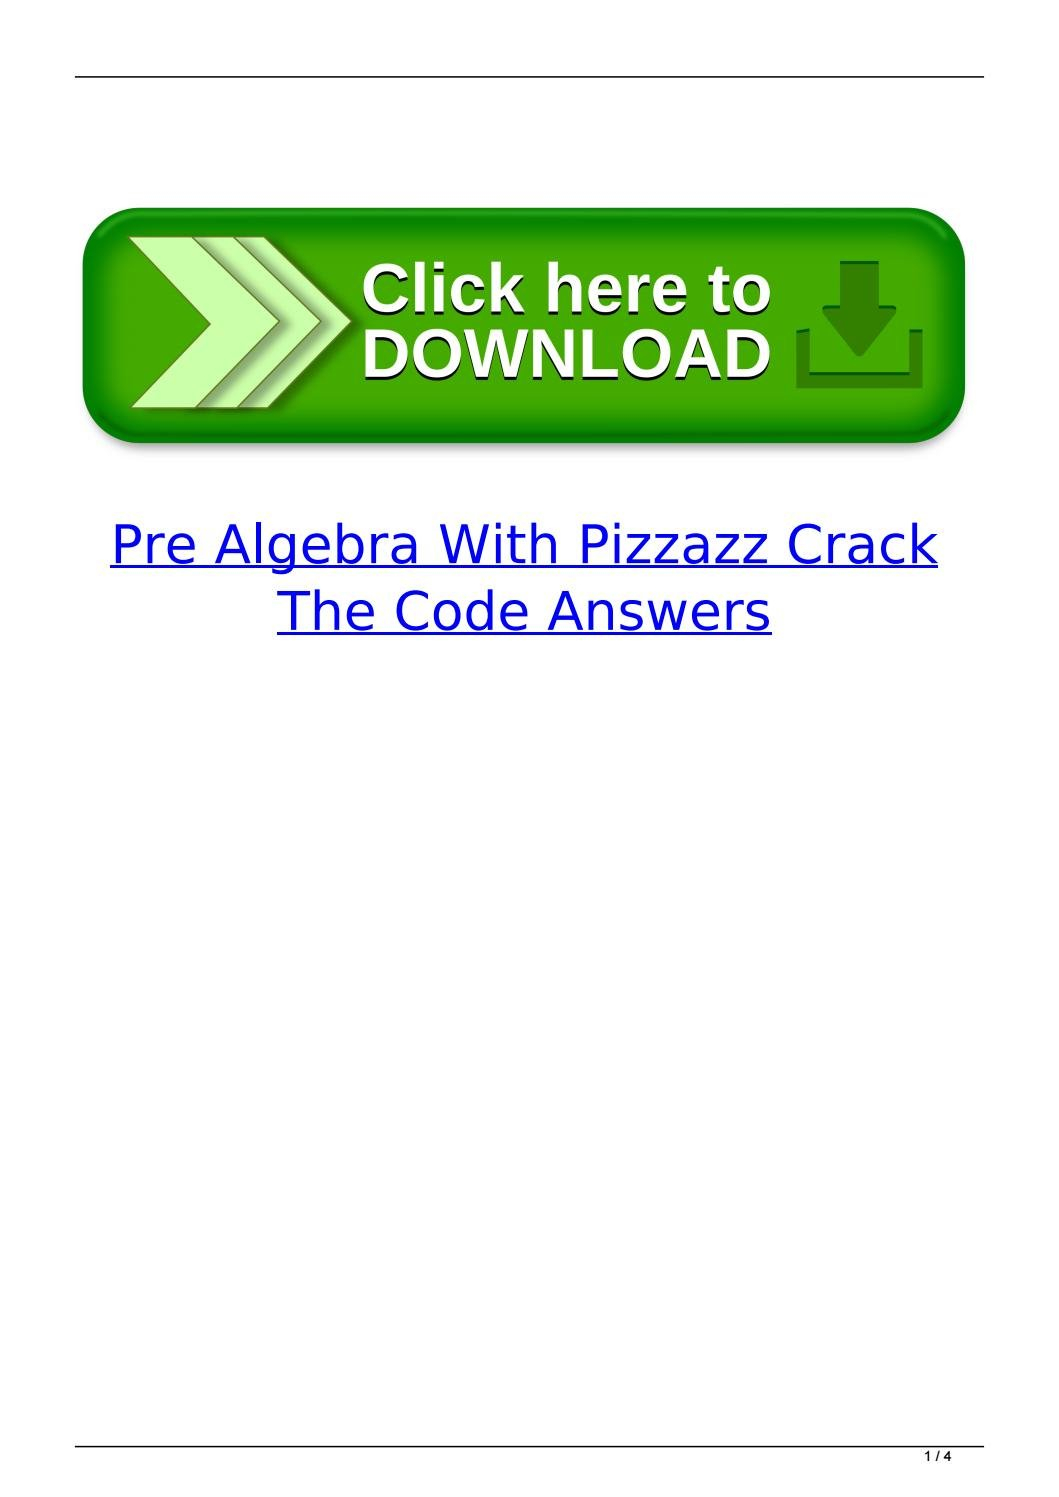 Pre Algebra With Pizzazz Crack The Code Answers As Well As Crack The Code Math Worksheet Answers